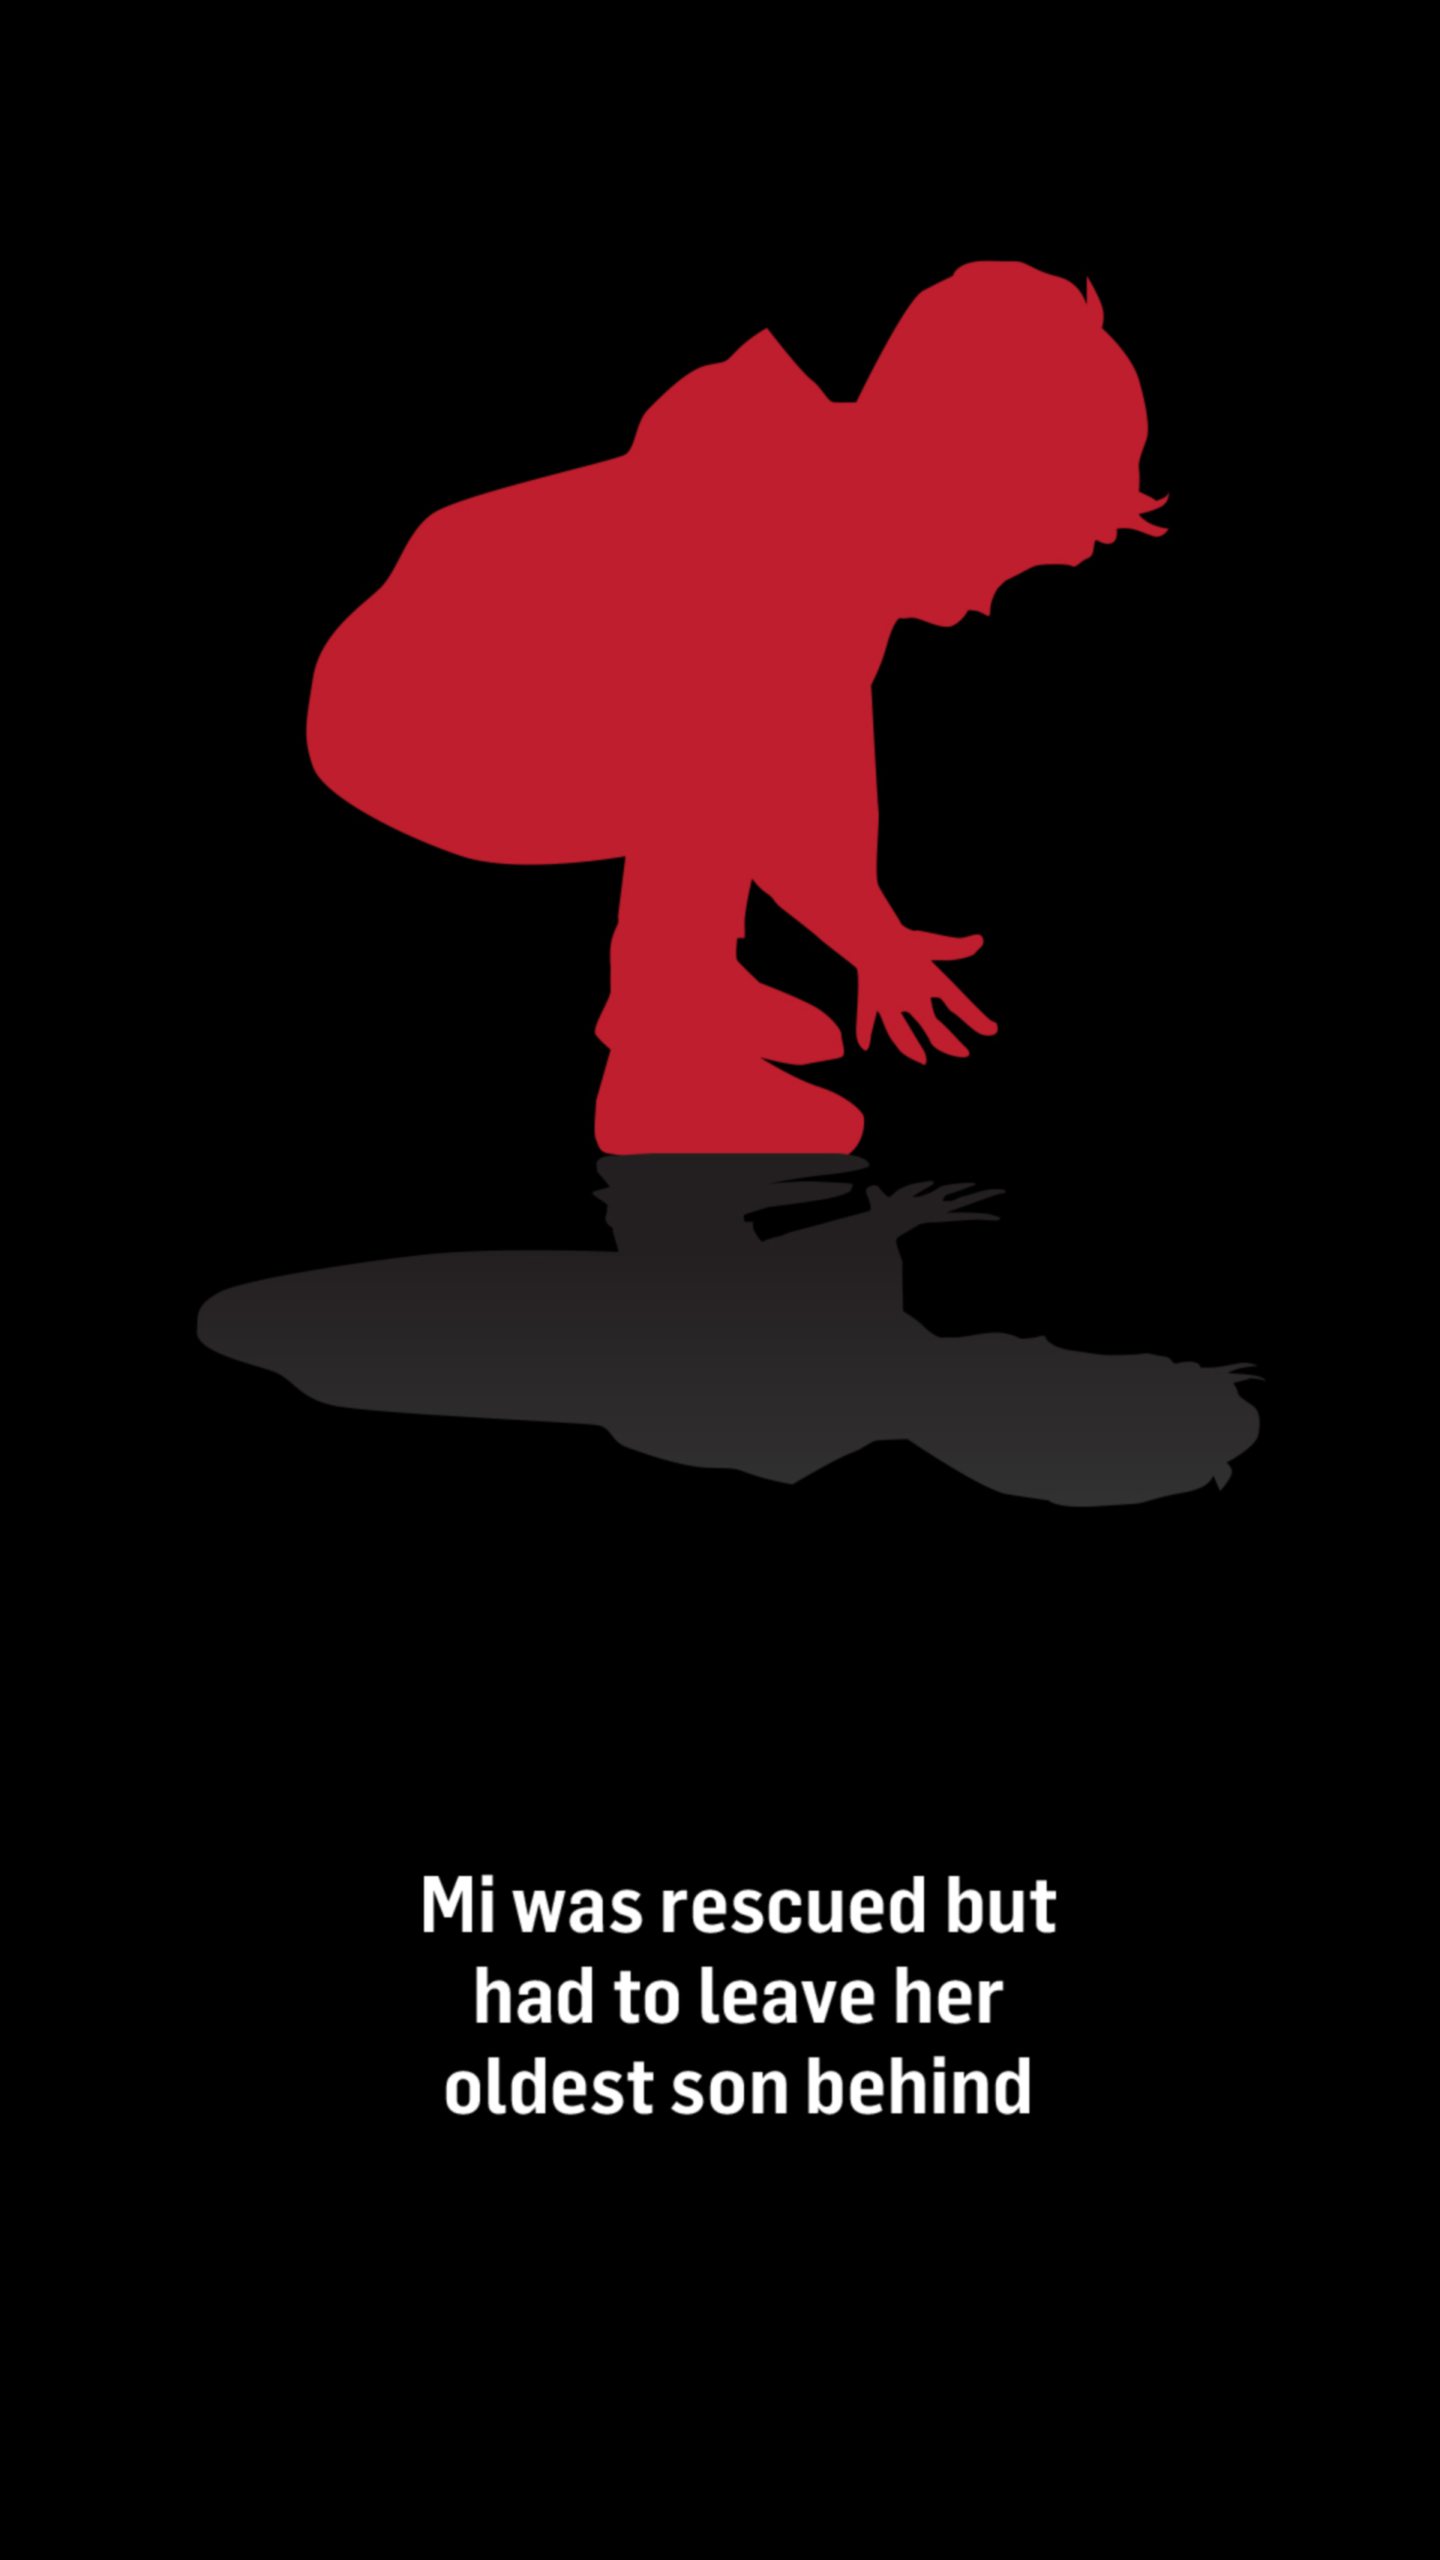 An illustration of a boy with his shadow below. Words below the image read: 

Mi was rescued but had to leave her oldest son behind.